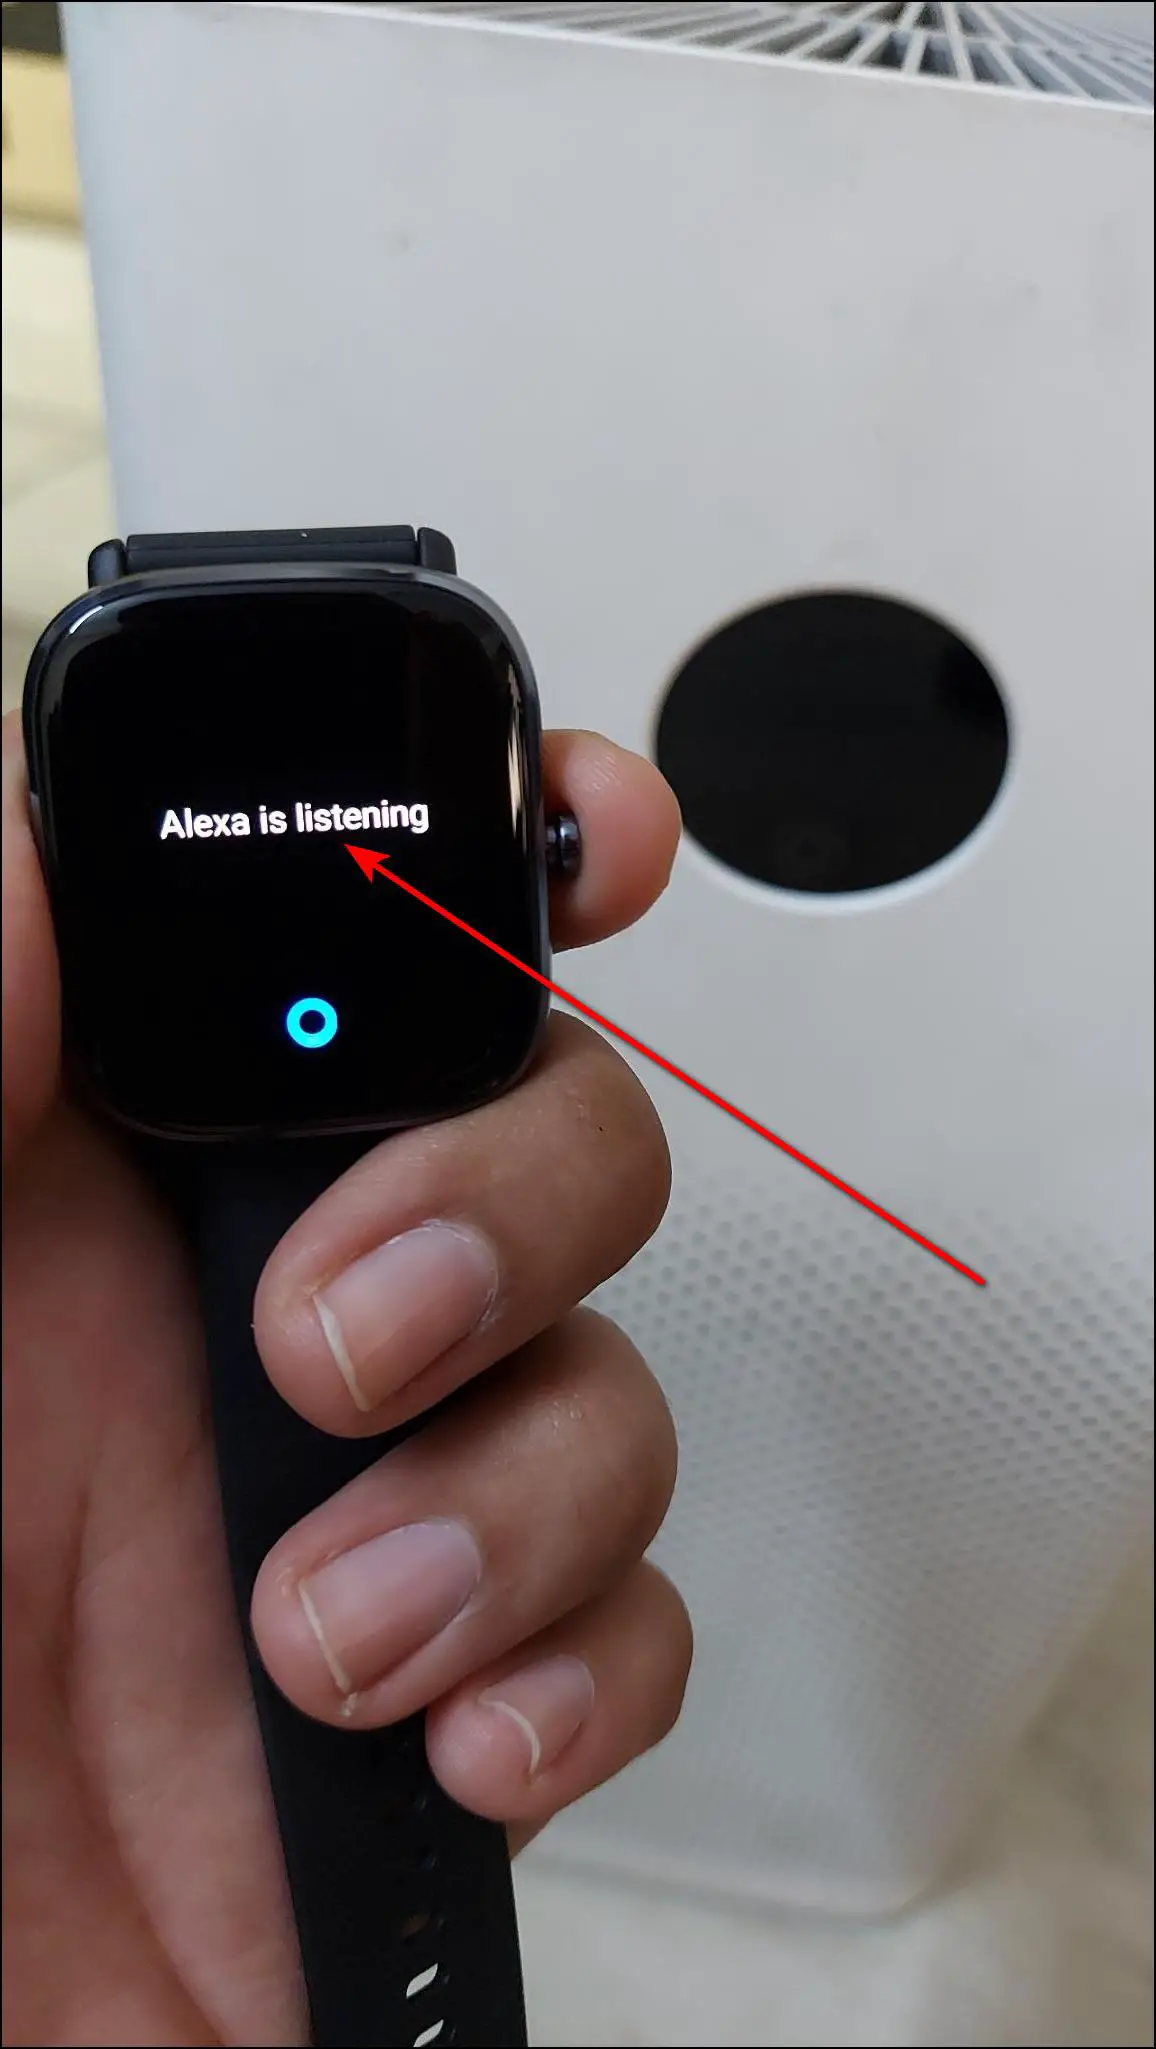 Control Smart Devices With Alexa on Amazfit Smartwatches